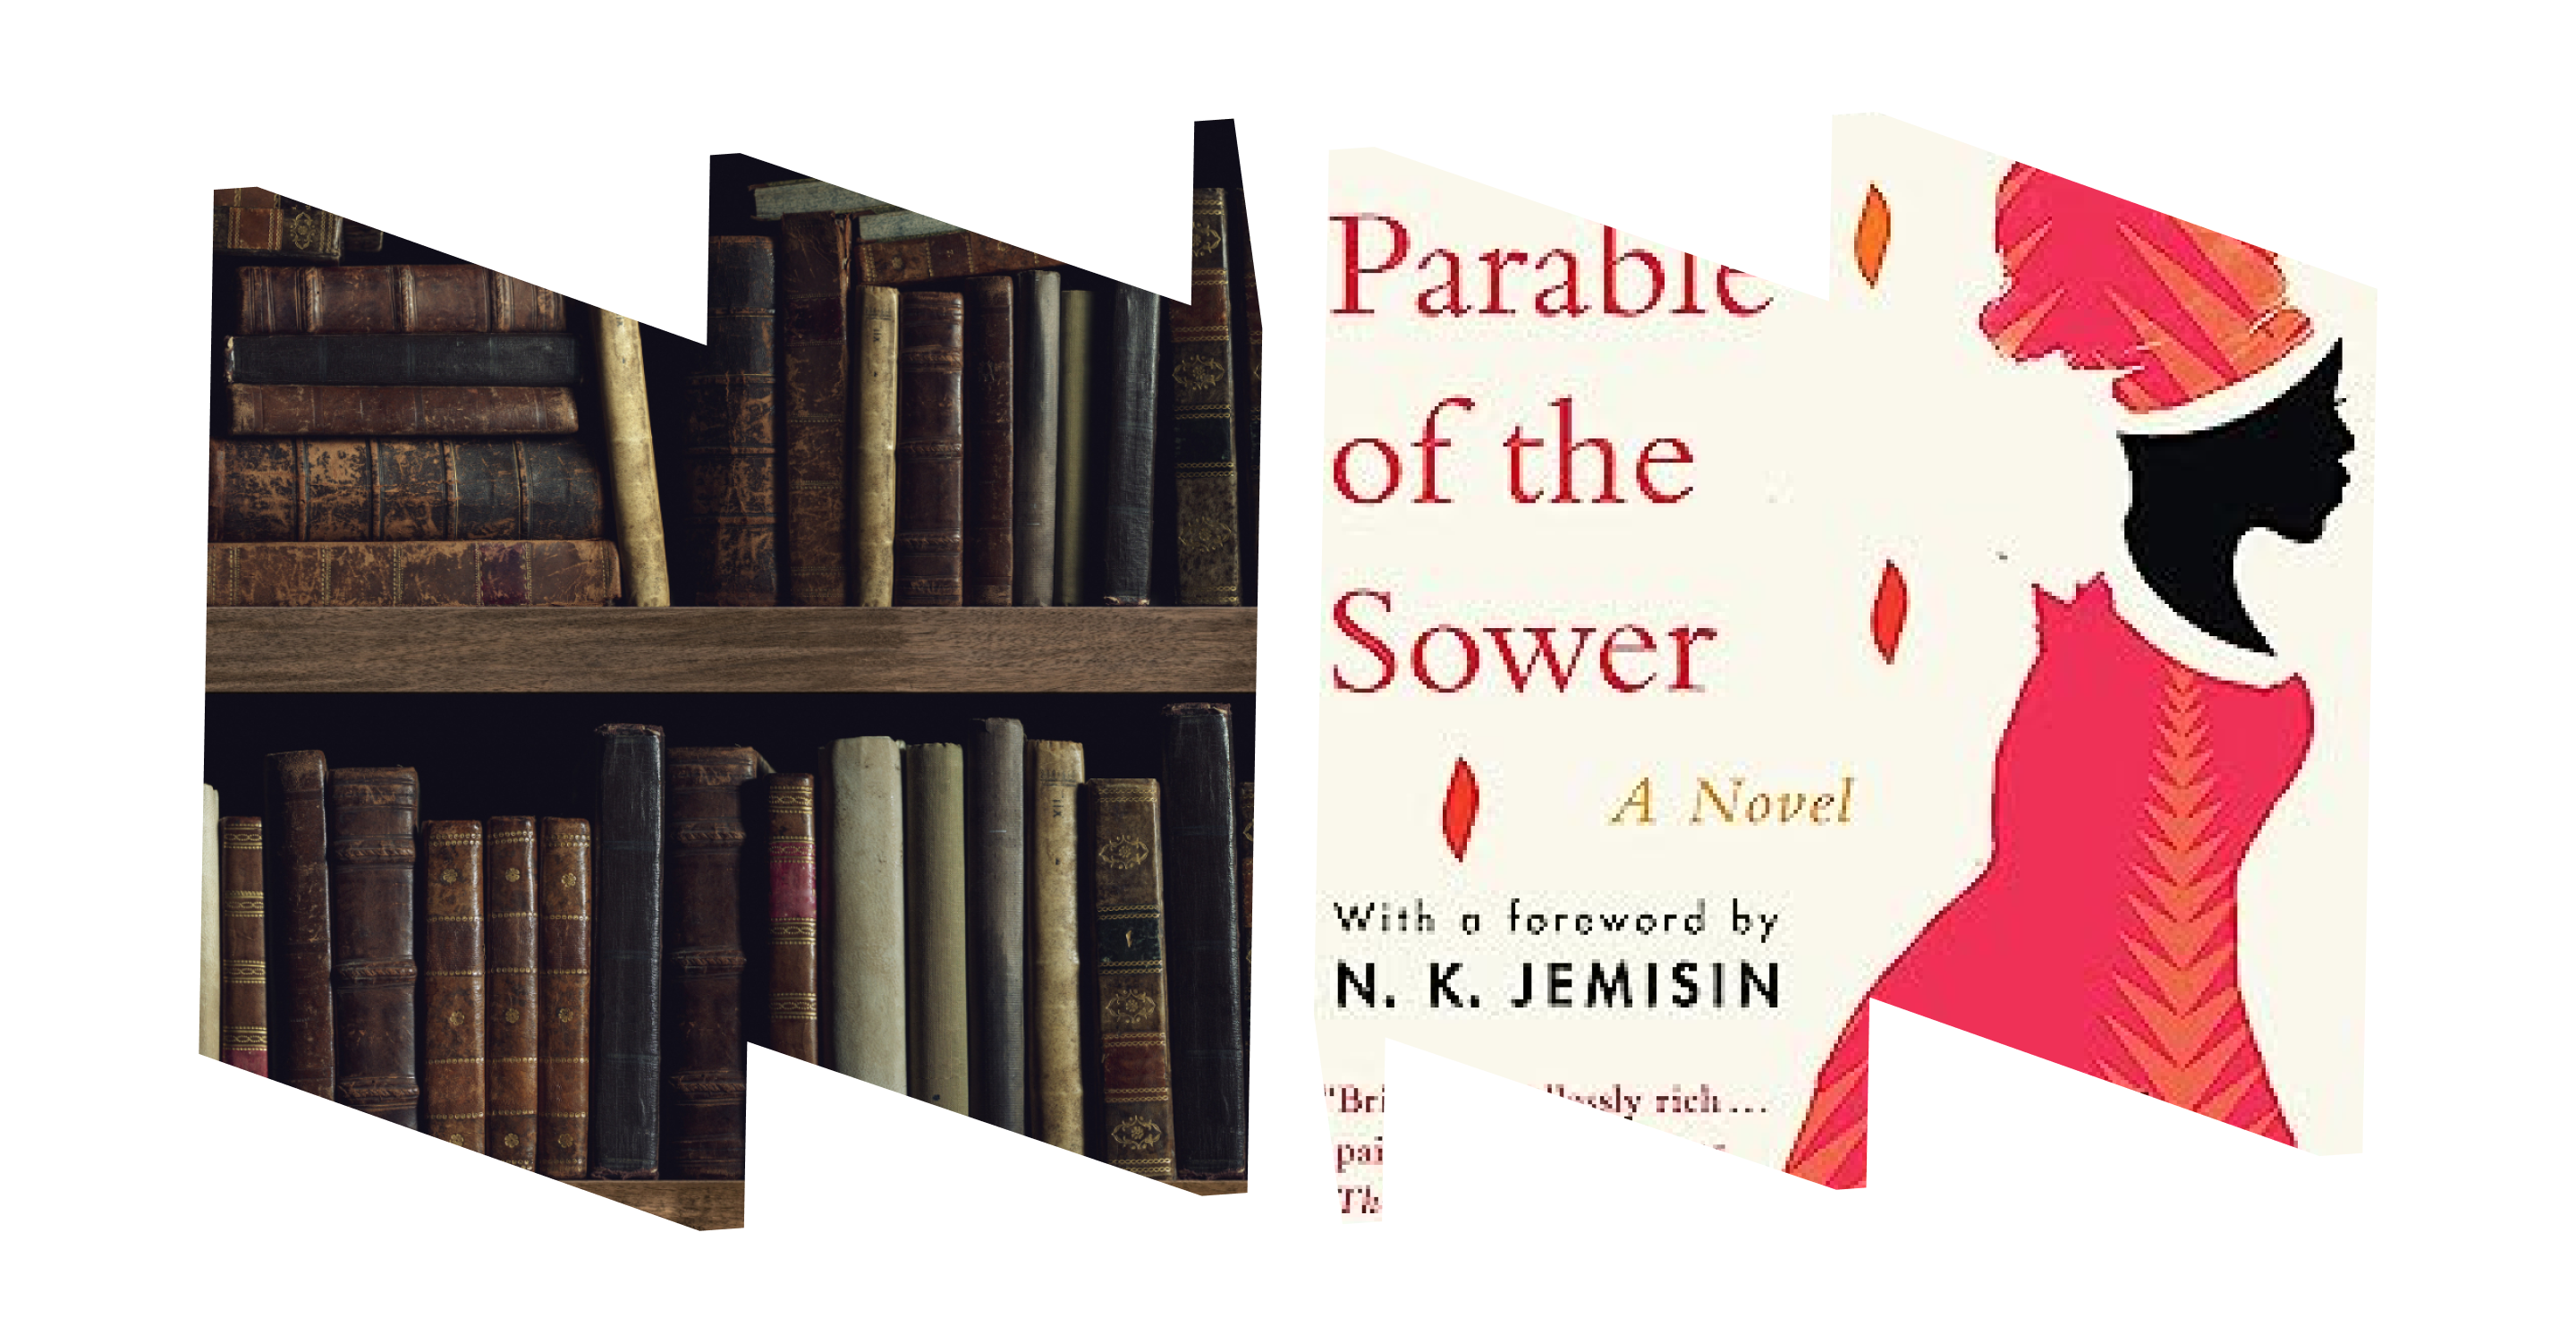 In left "W" frame, image of books on a shelf; in right "M" frame, partial view of the "Parable of the Sower" book cover featuring illustration of a woman with red hat and red dress.